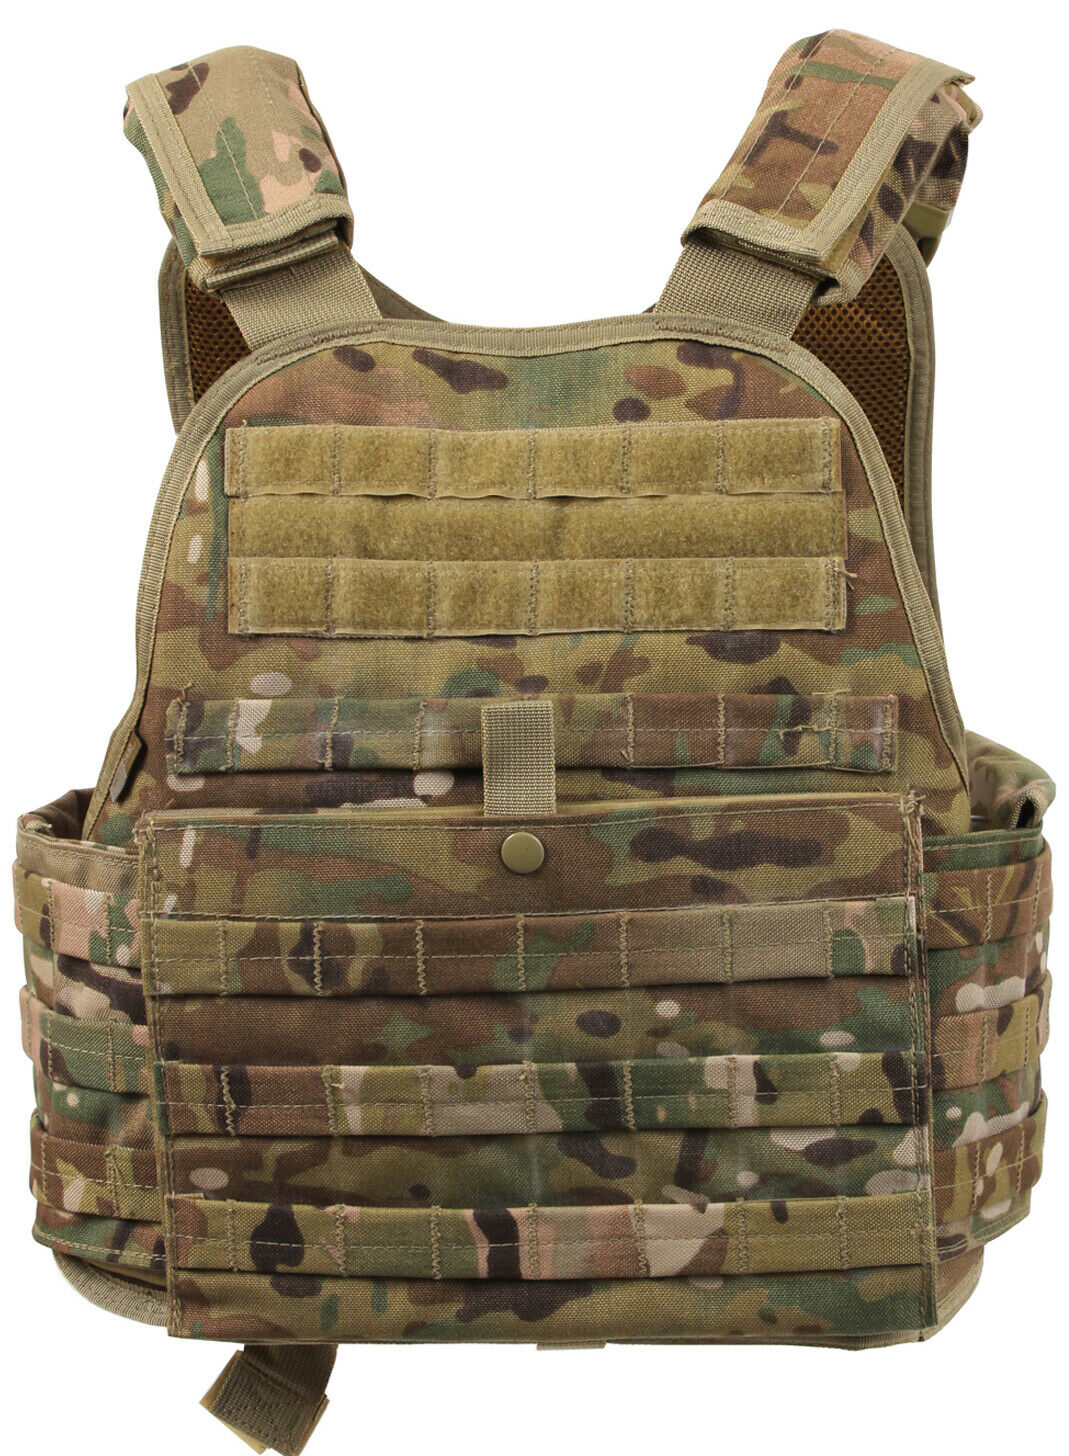 Rothco MOLLE Plate Carrier Vest Oversized Big Tall 3XL